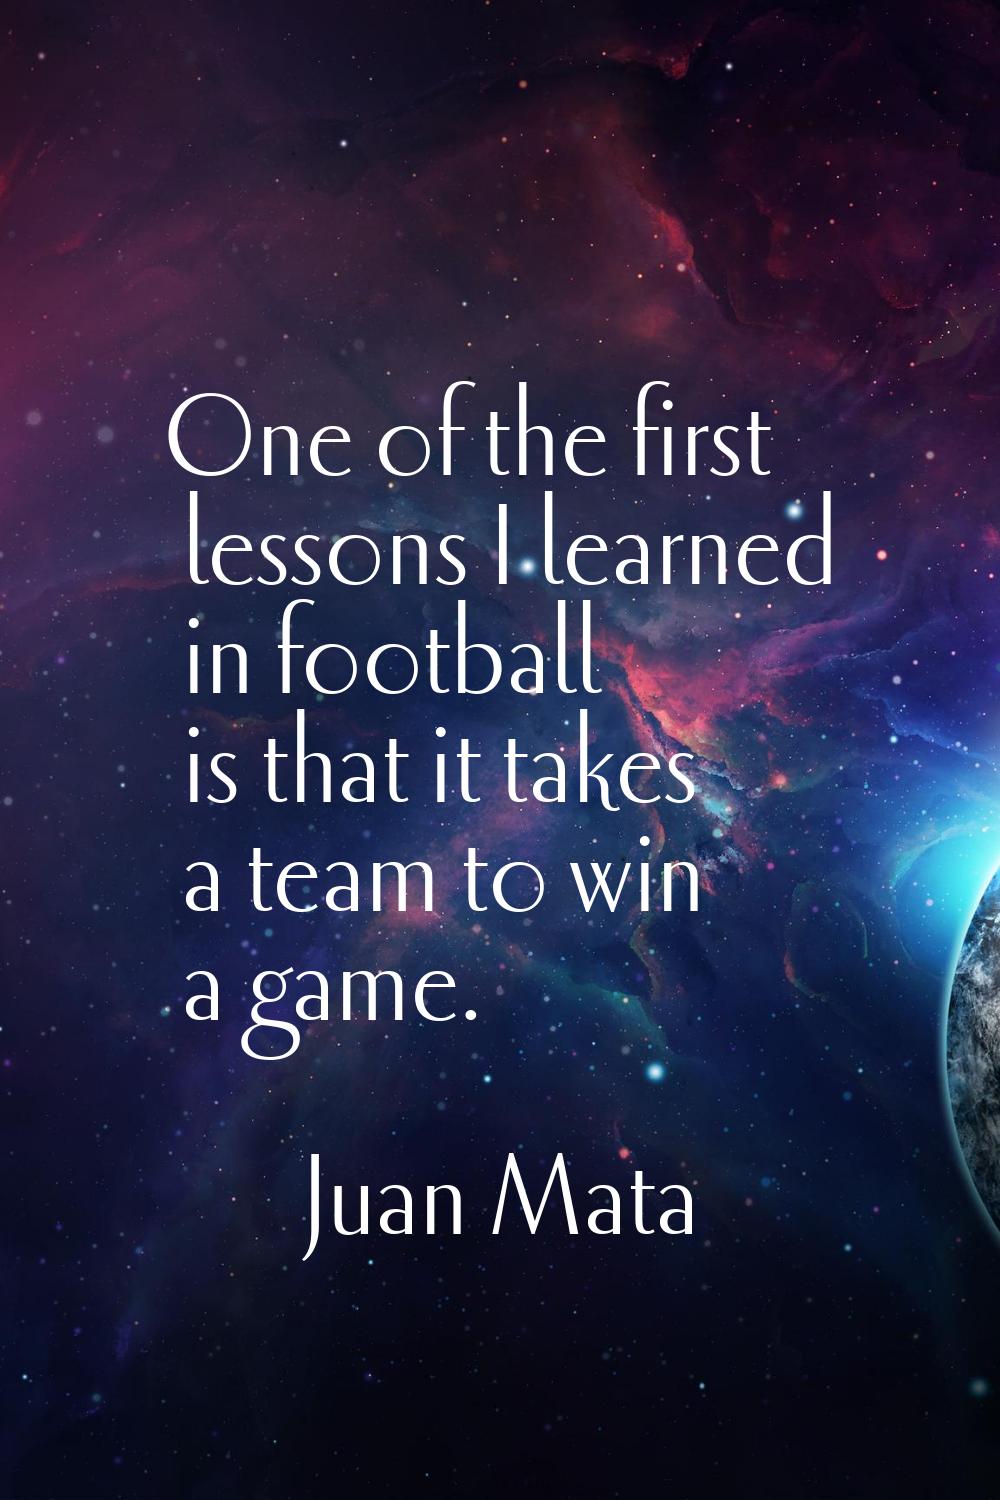 One of the first lessons I learned in football is that it takes a team to win a game.